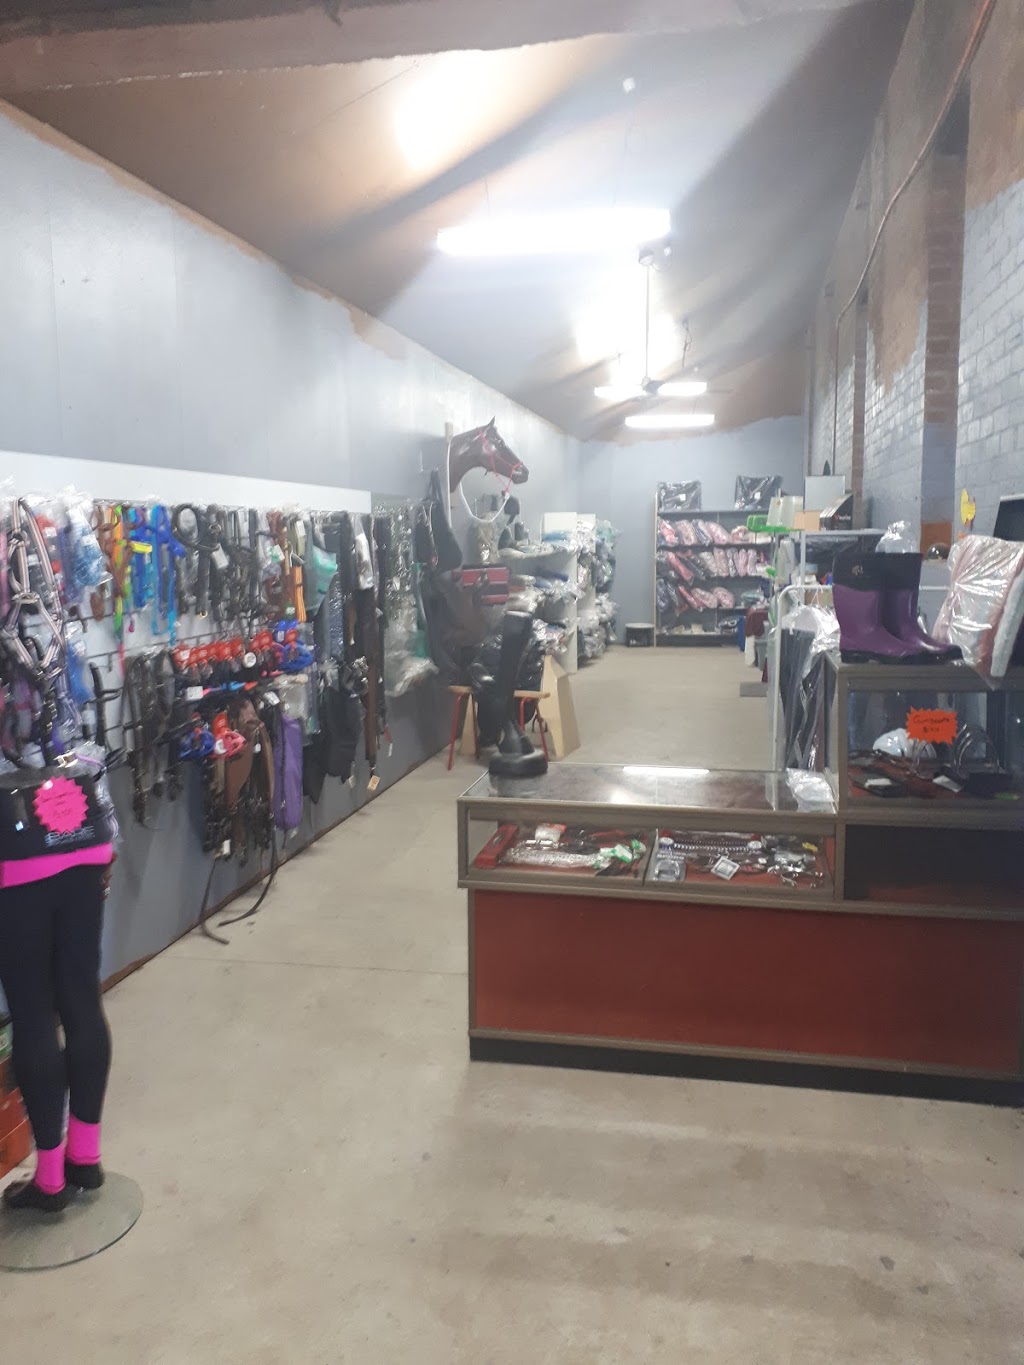 West Wallsend Produce and Saddlery | store | 76A Carrington St, West Wallsend NSW 2286, Australia | 0249531272 OR +61 2 4953 1272